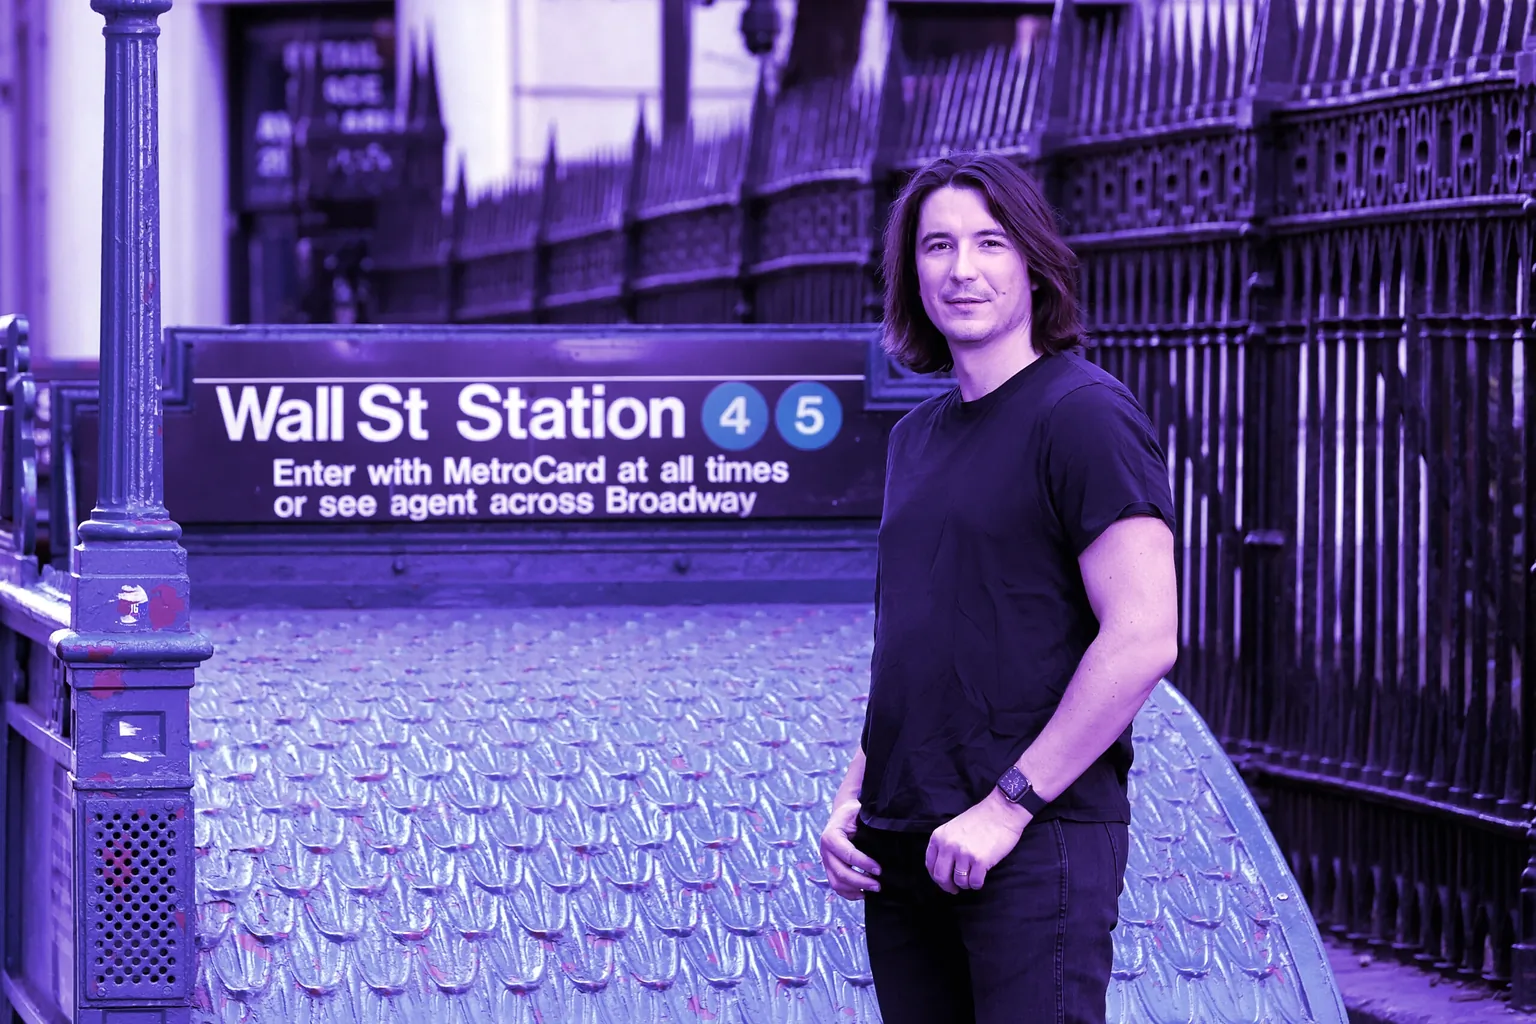 NEW YORK, NEW YORK - JULY 24: Robinhood Co-Founder Vlad Tenev on July 24, 2021 in New York City. (Photo by Mike Coppola/Getty Images for Robinhood)